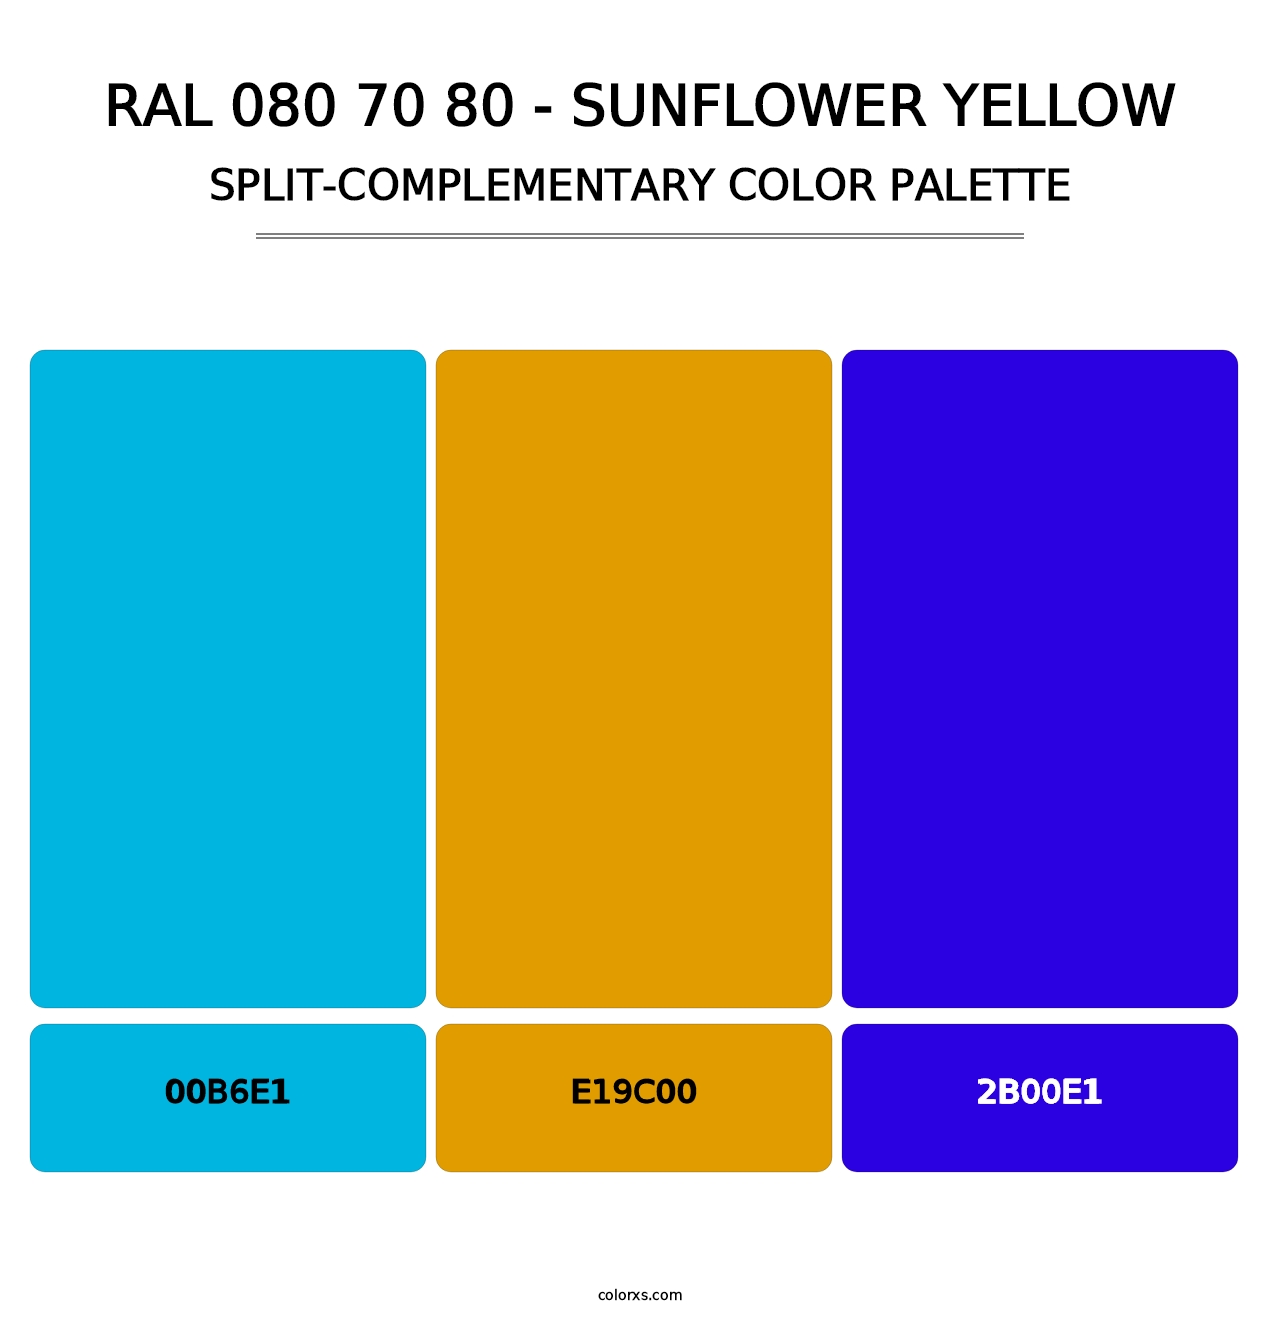 RAL 080 70 80 - Sunflower Yellow - Split-Complementary Color Palette